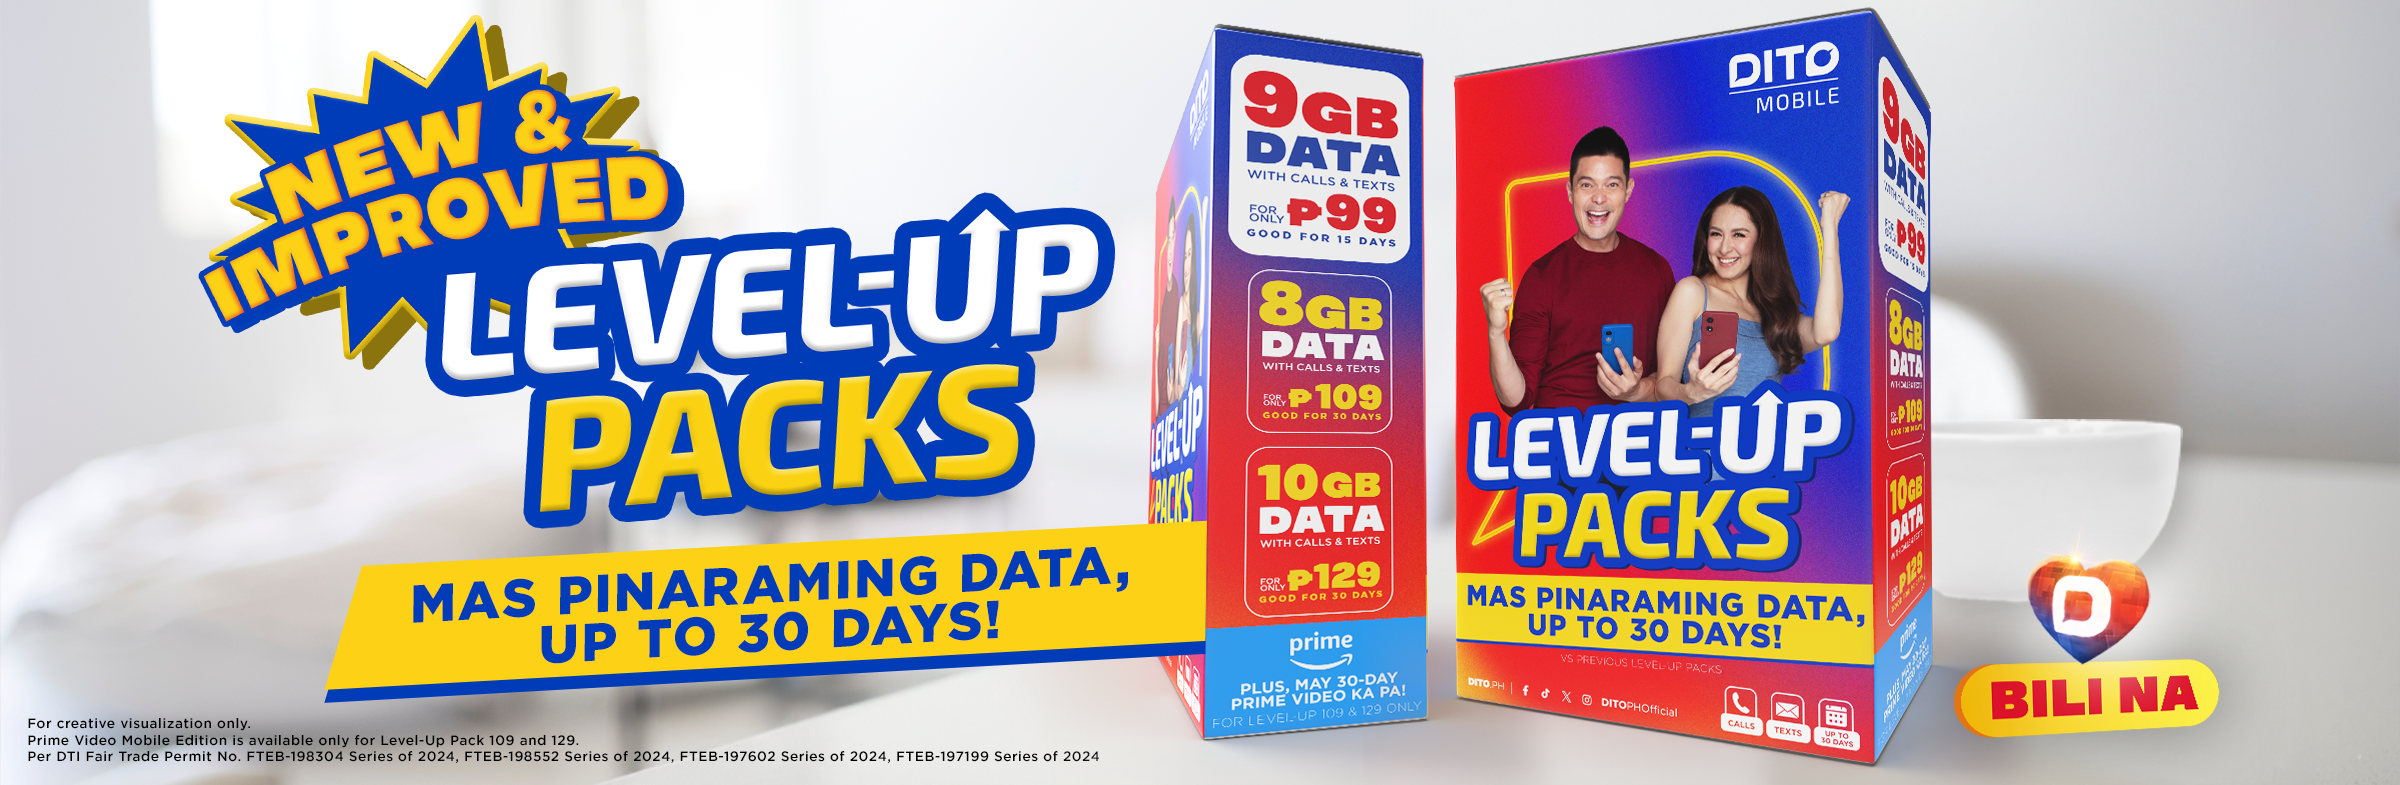 DITO Launches New and Improved Level-Up Packs with More Data and Prime Video